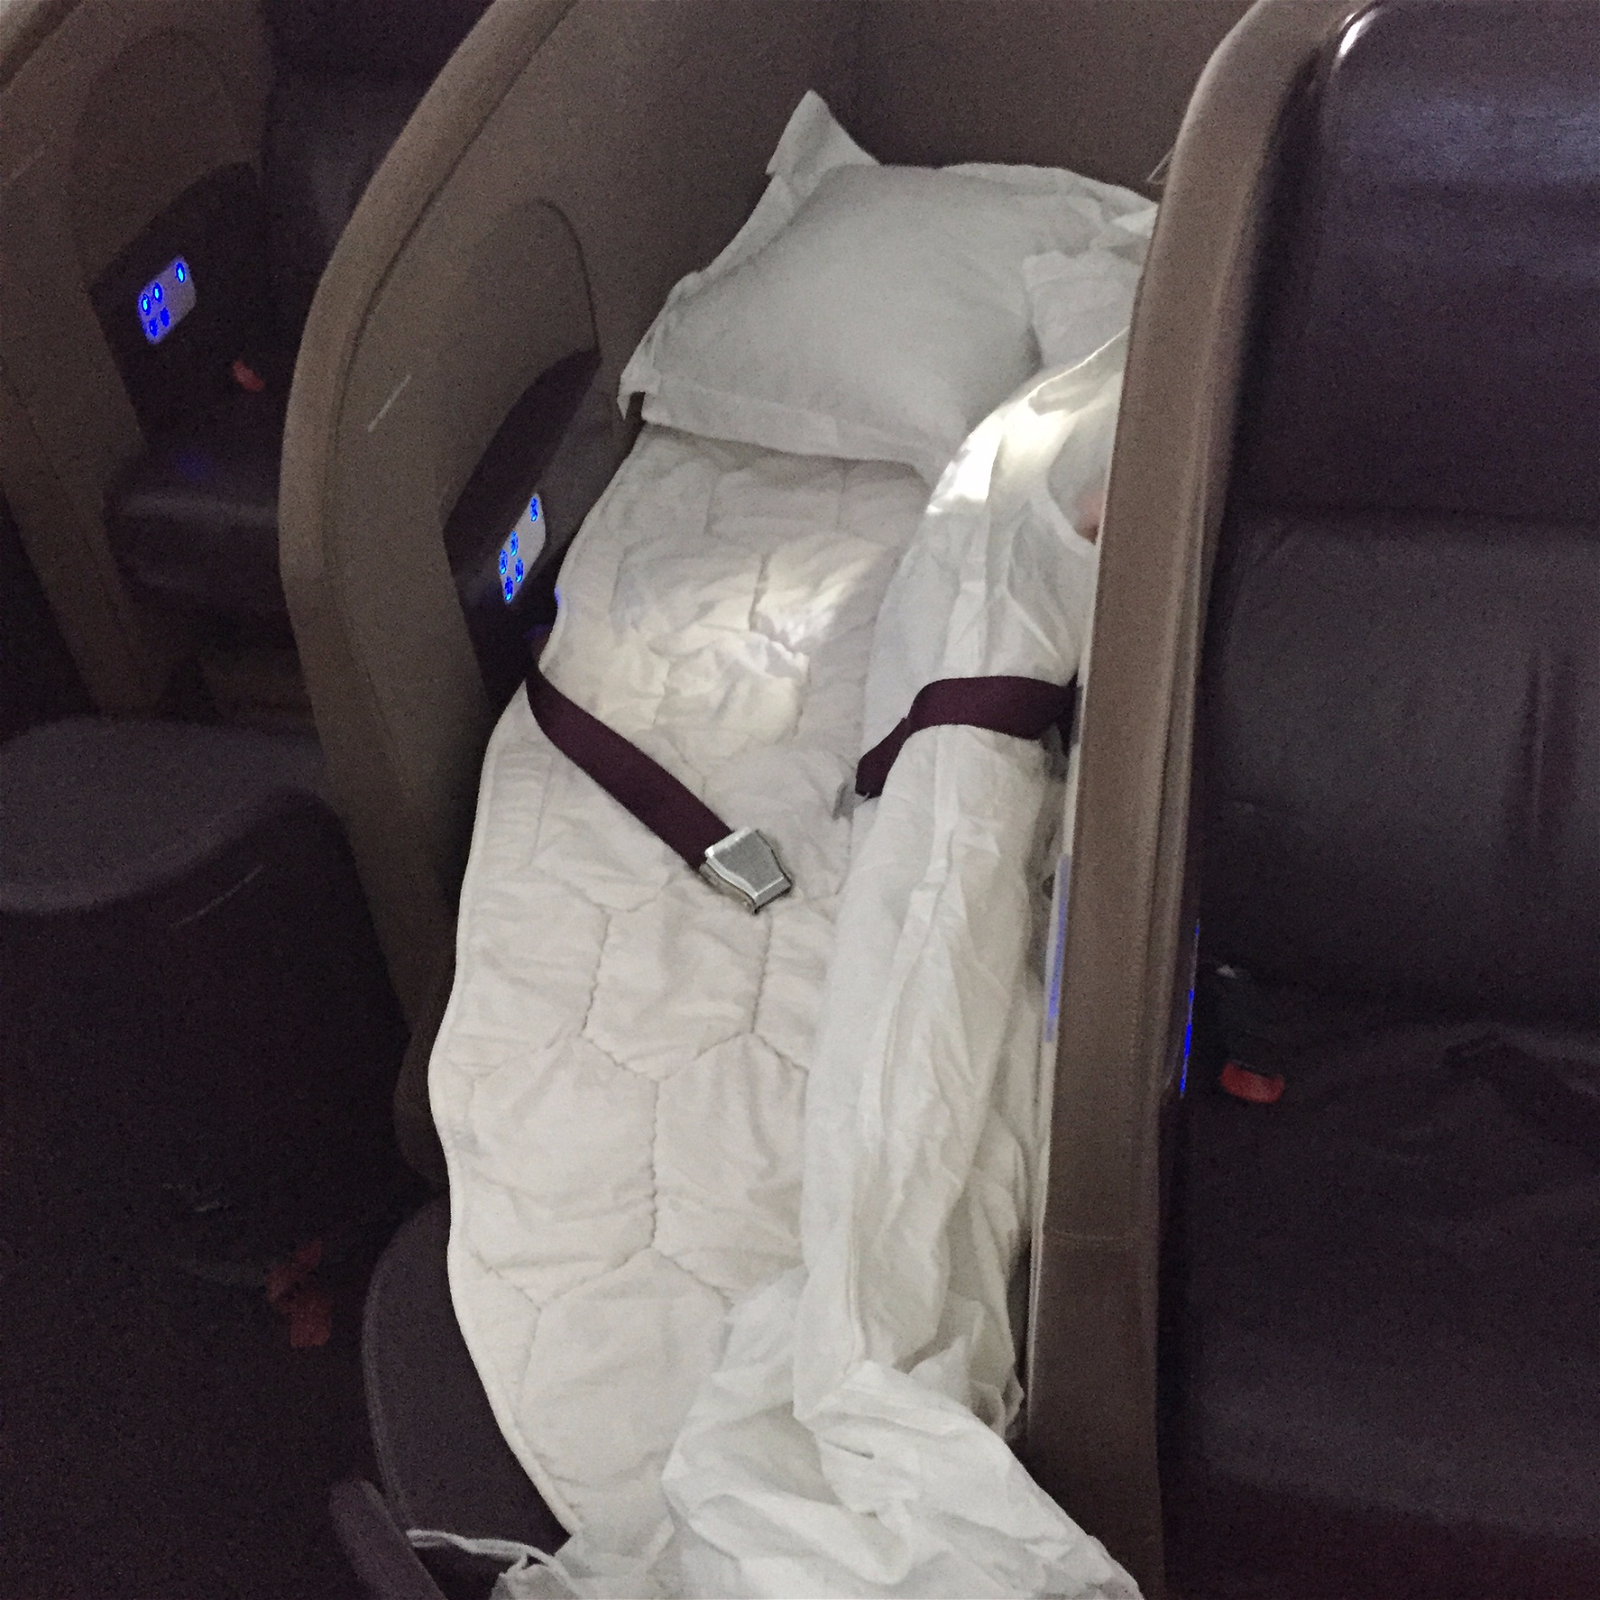 Seat across the aisle that was made into a bed